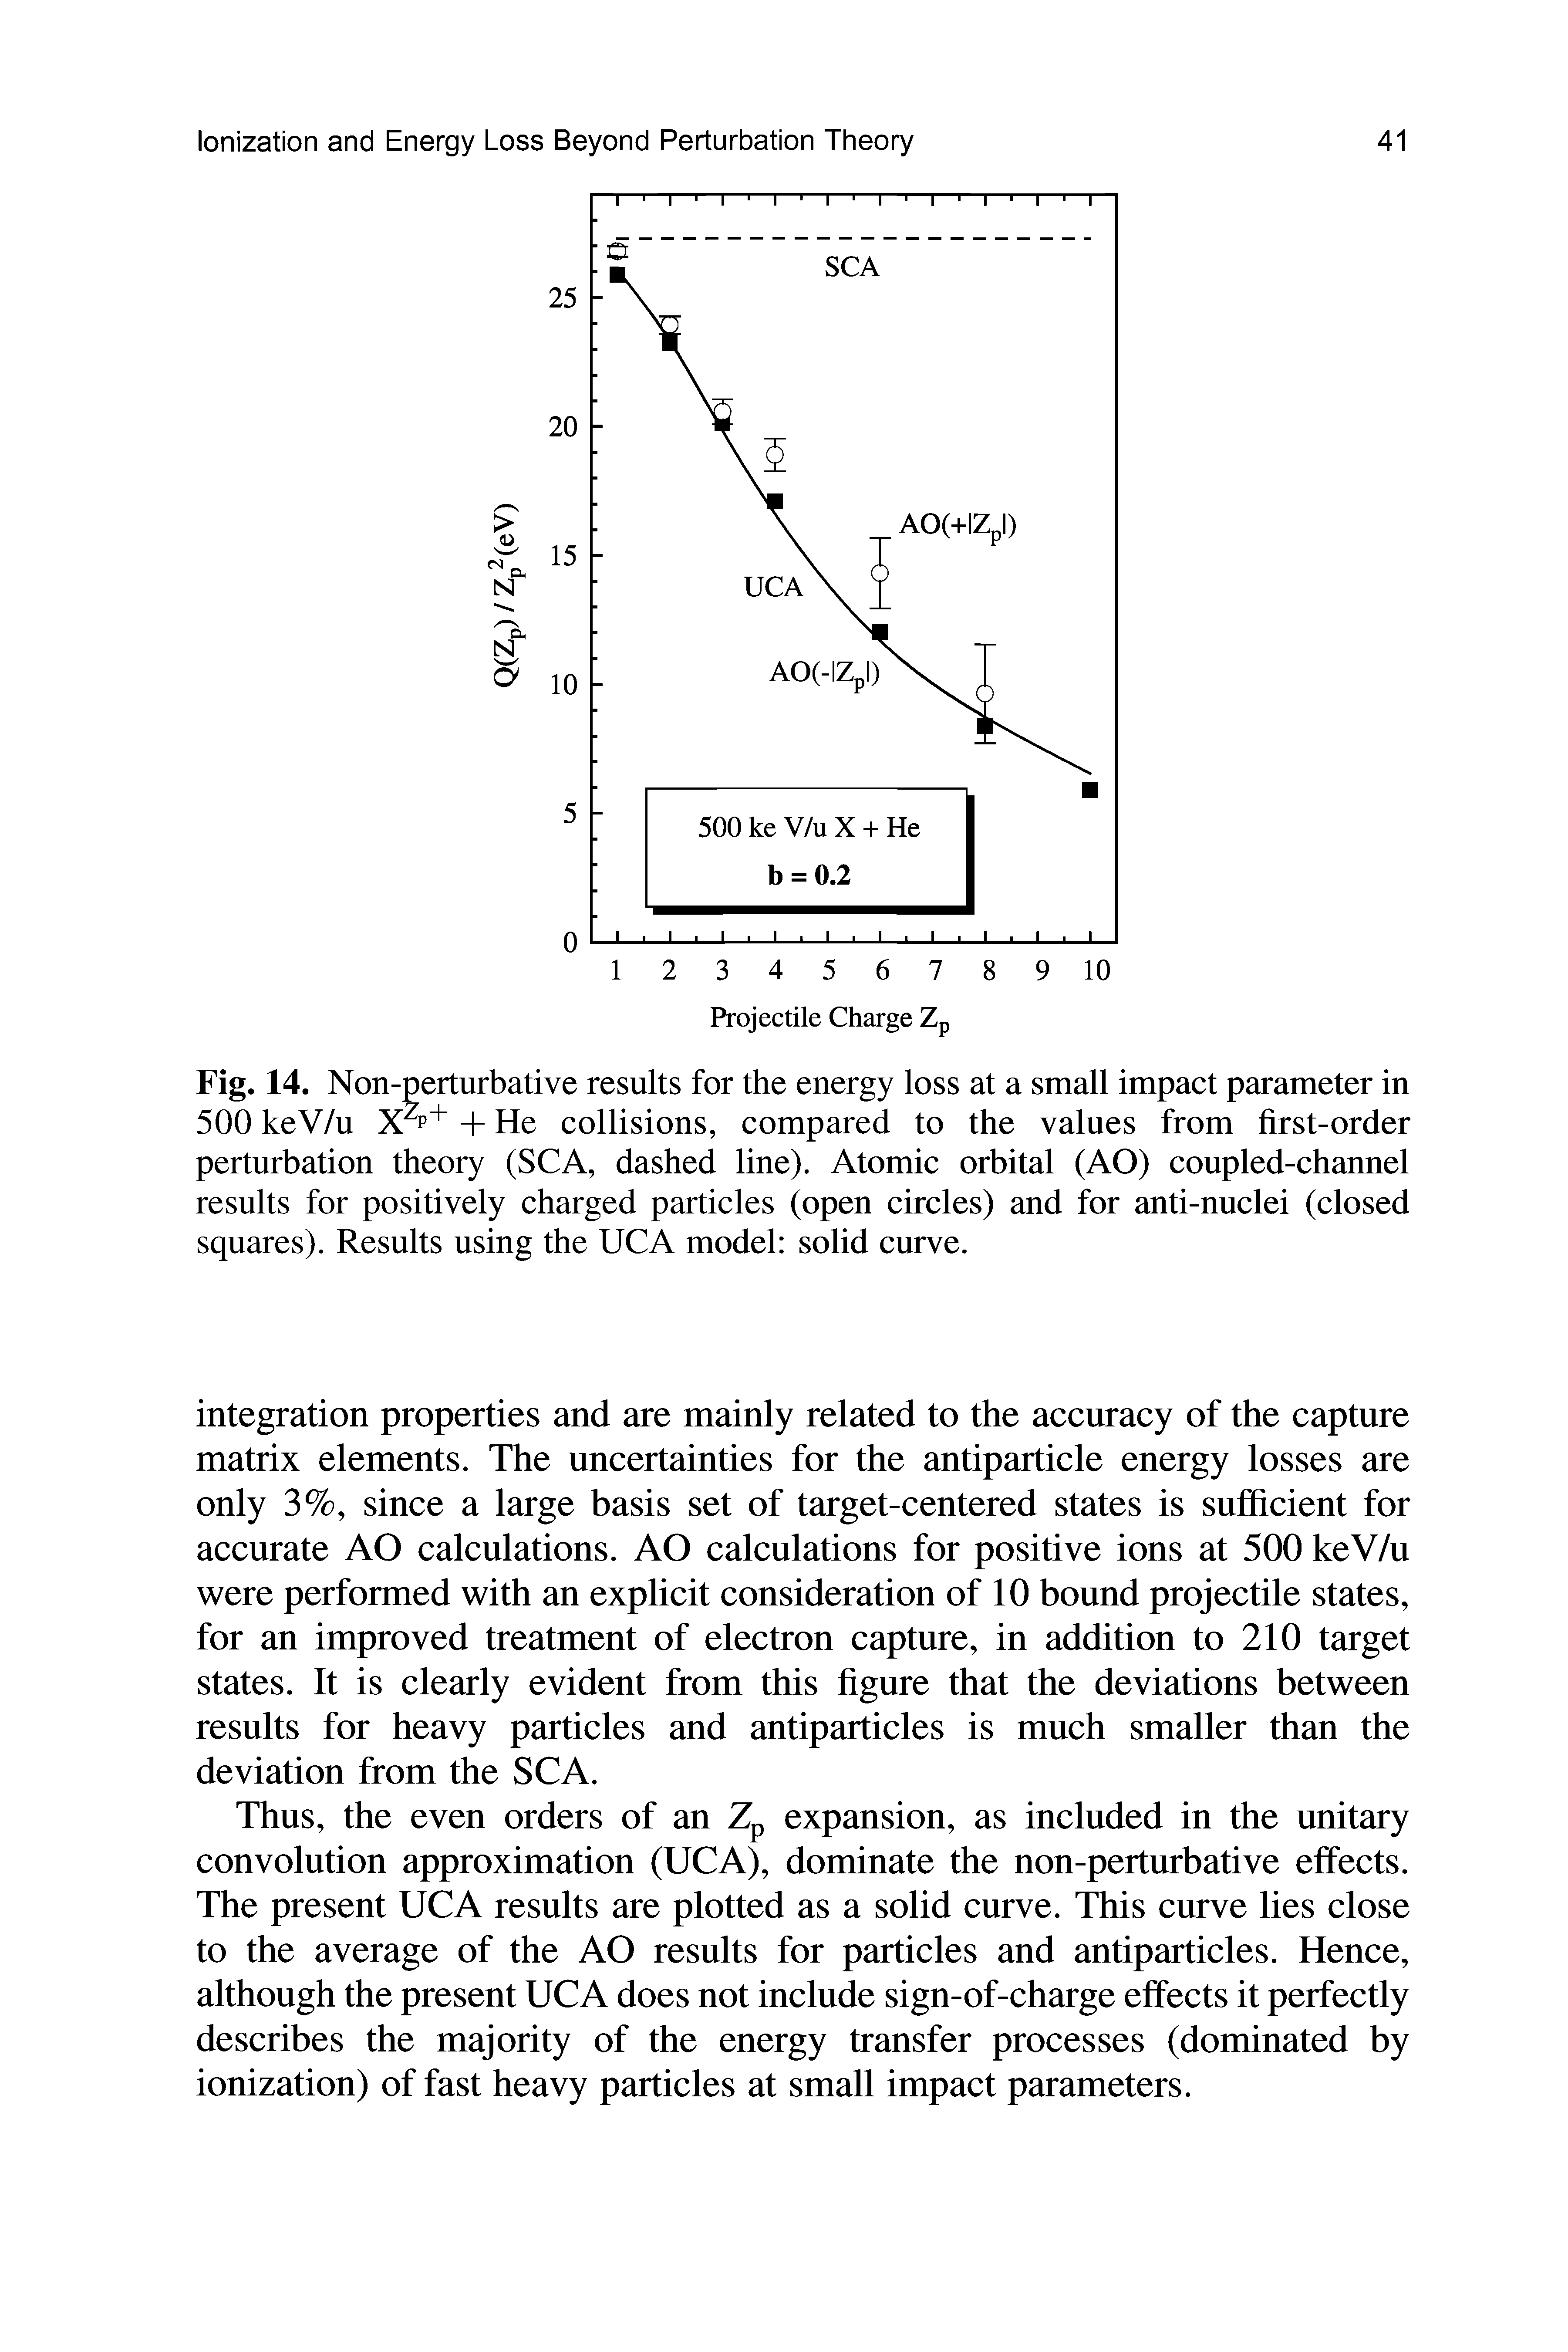 Fig. 14. Non-perturbative results for the energy loss at a small impact parameter in 500 keV/u + He collisions, compared to the values from first-order perturbation theory (SCA, dashed line). Atomic orbital (AO) coupled-channel results for positively charged particles (open circles) and for anti-nuclei (closed squares). Results using the UCA model solid curve.